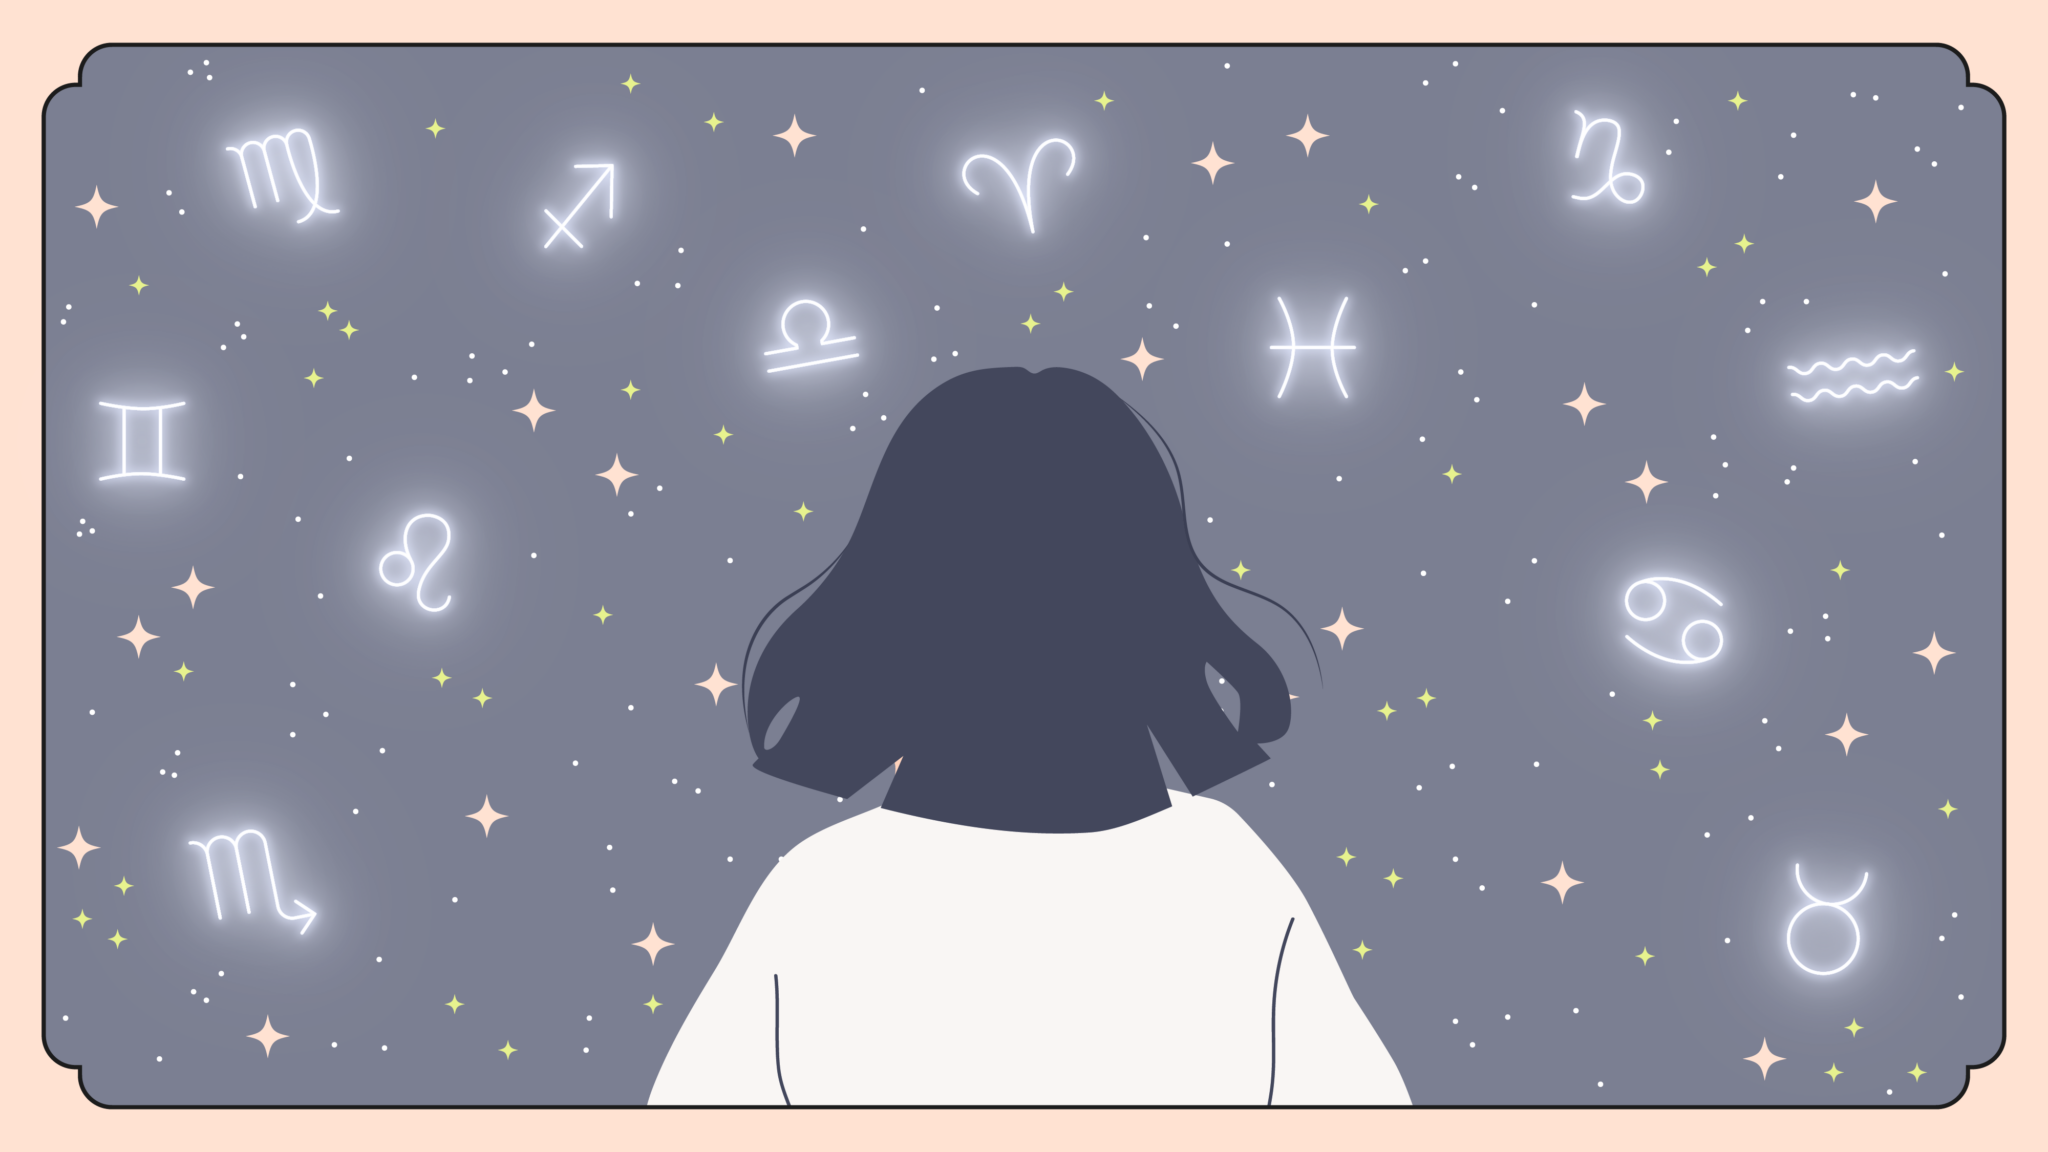 Illustration of a person looking at zodiac signs in the sky